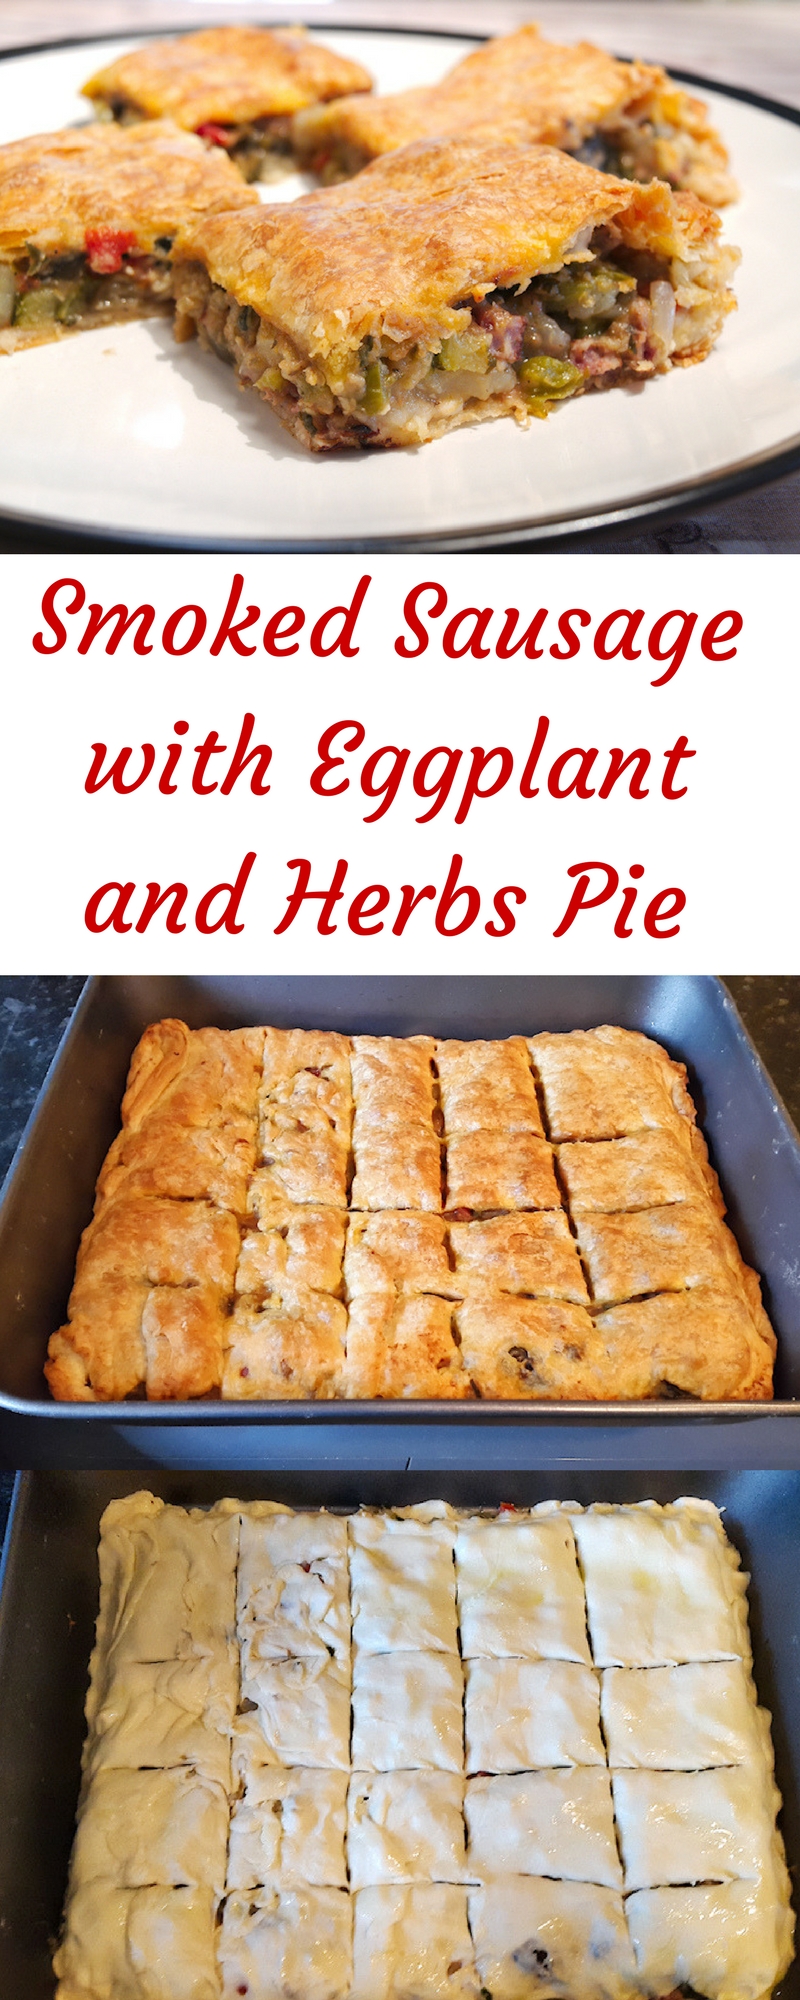 Smoked Sausage with Eggplant and Herbs Pie